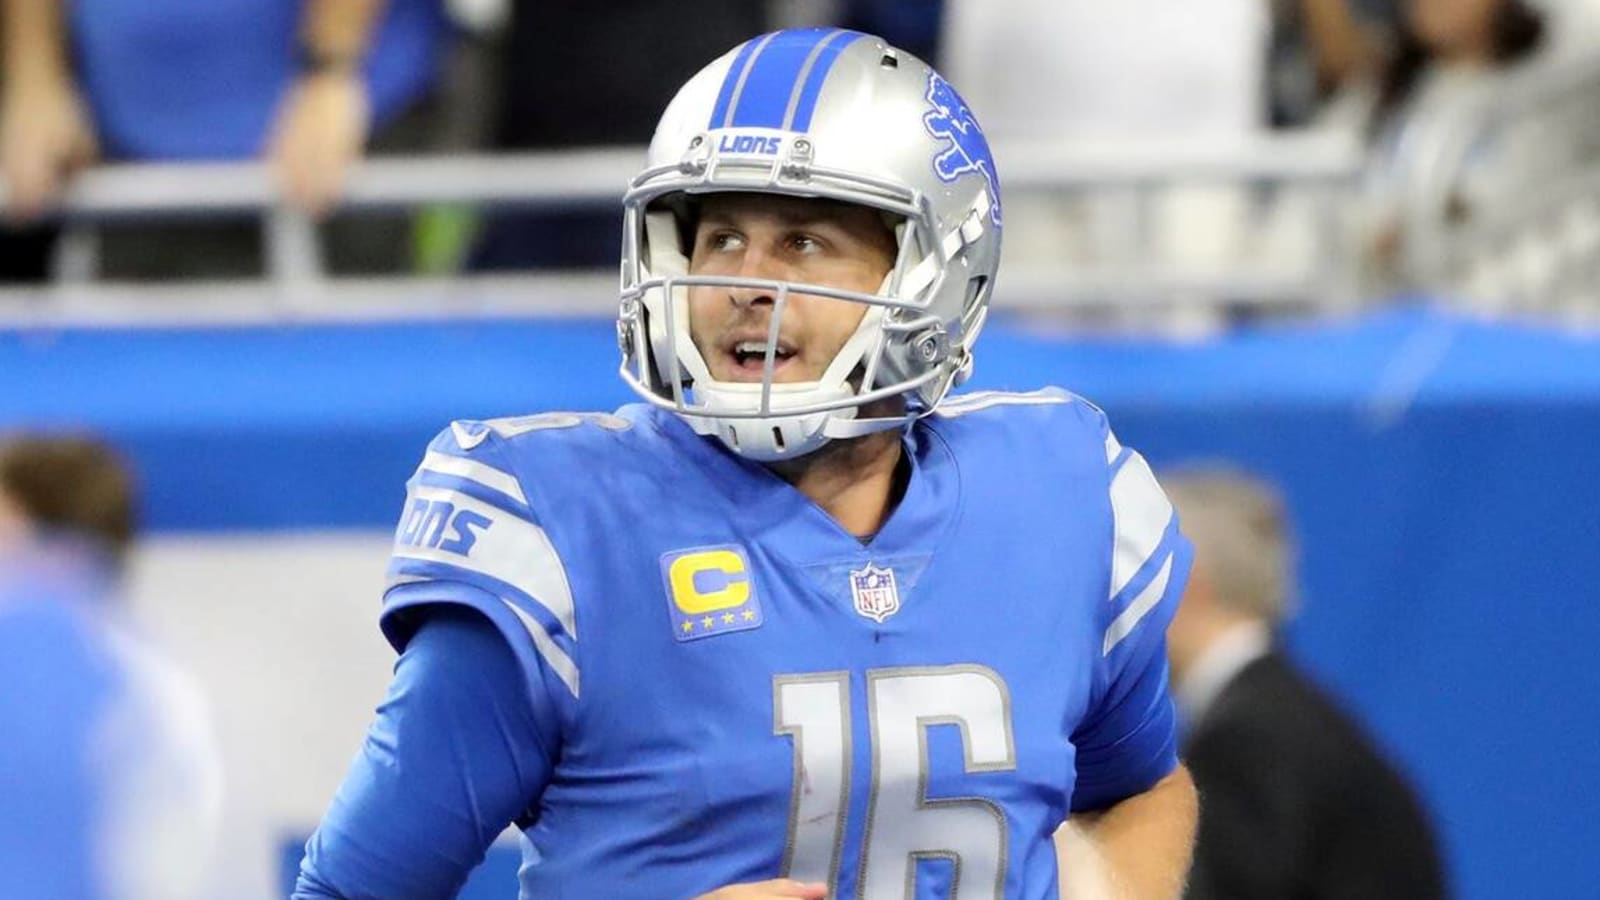 Jared Goff says Lions aren’t close to winning, they’re there